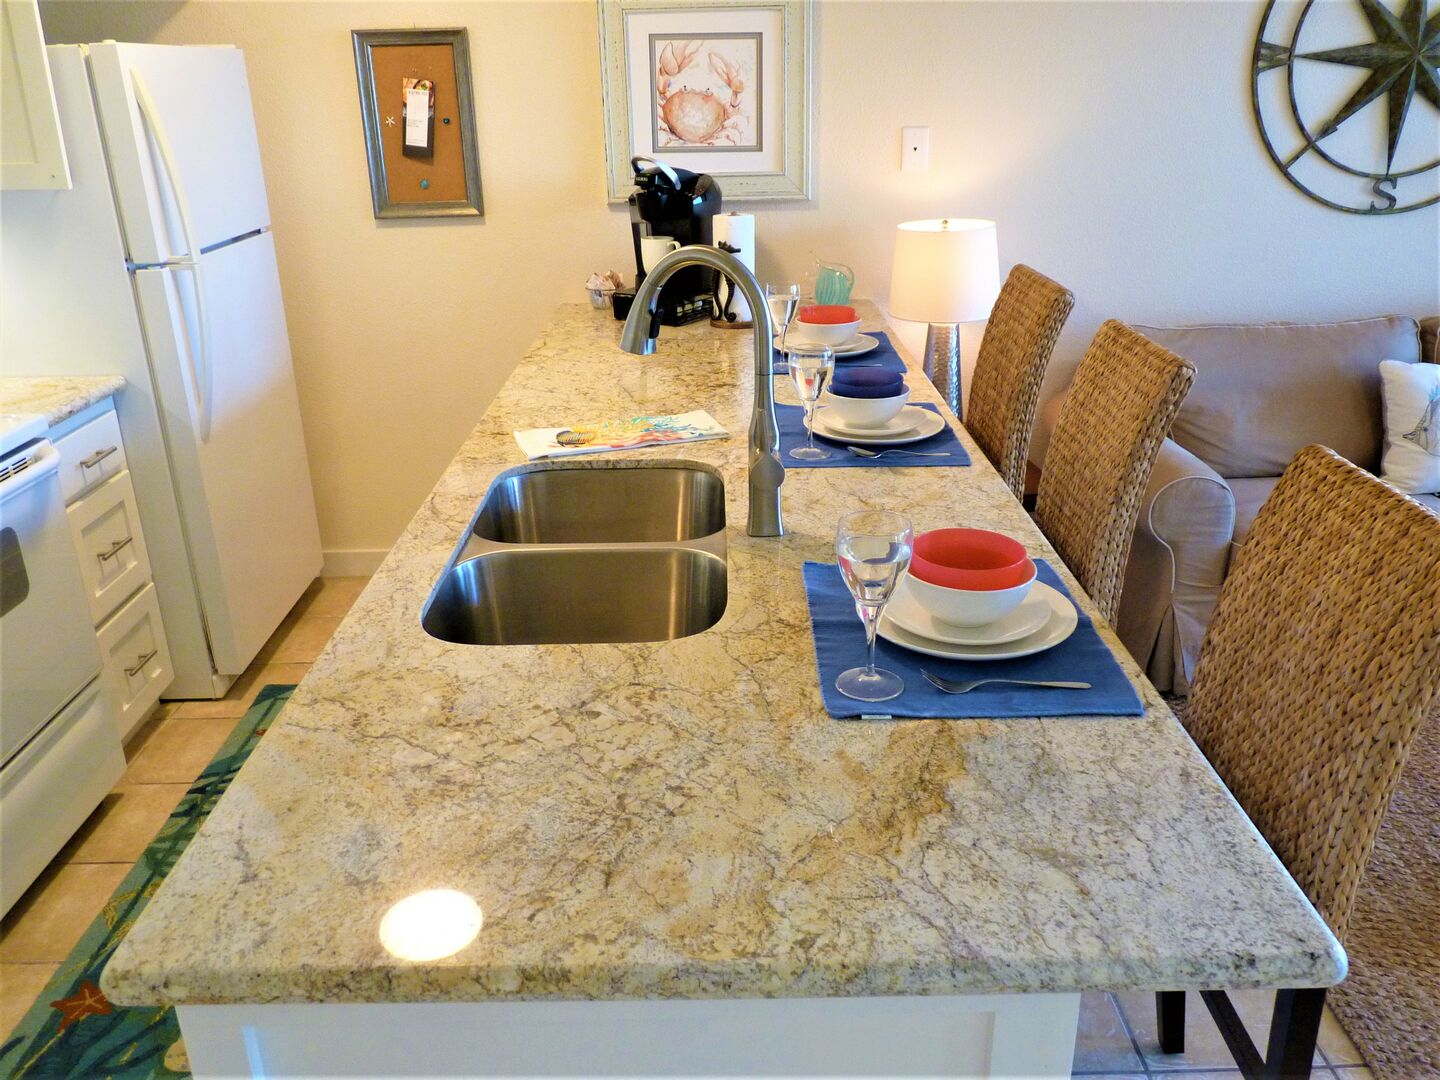 The breakfast bar has plenty of room for food prep, dining, or even a workspace